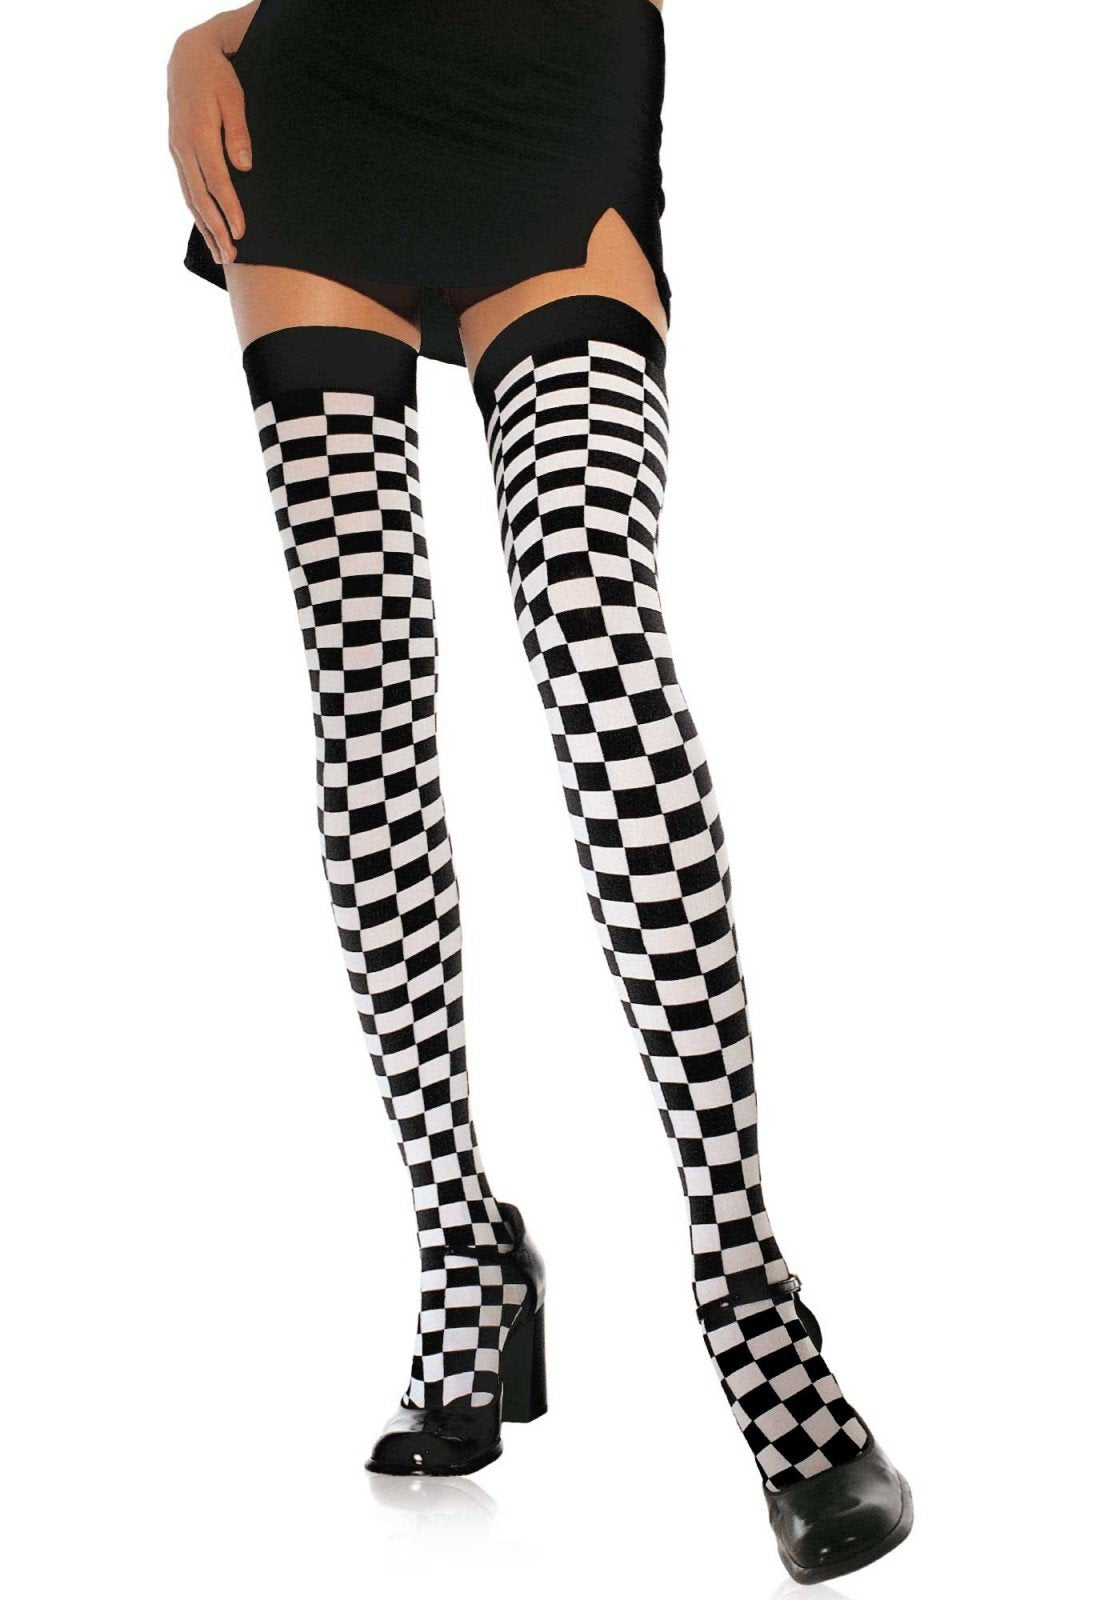 Leg Avenue 6281 Checkerboard Thigh Highs - black and white chess board over the knee socks